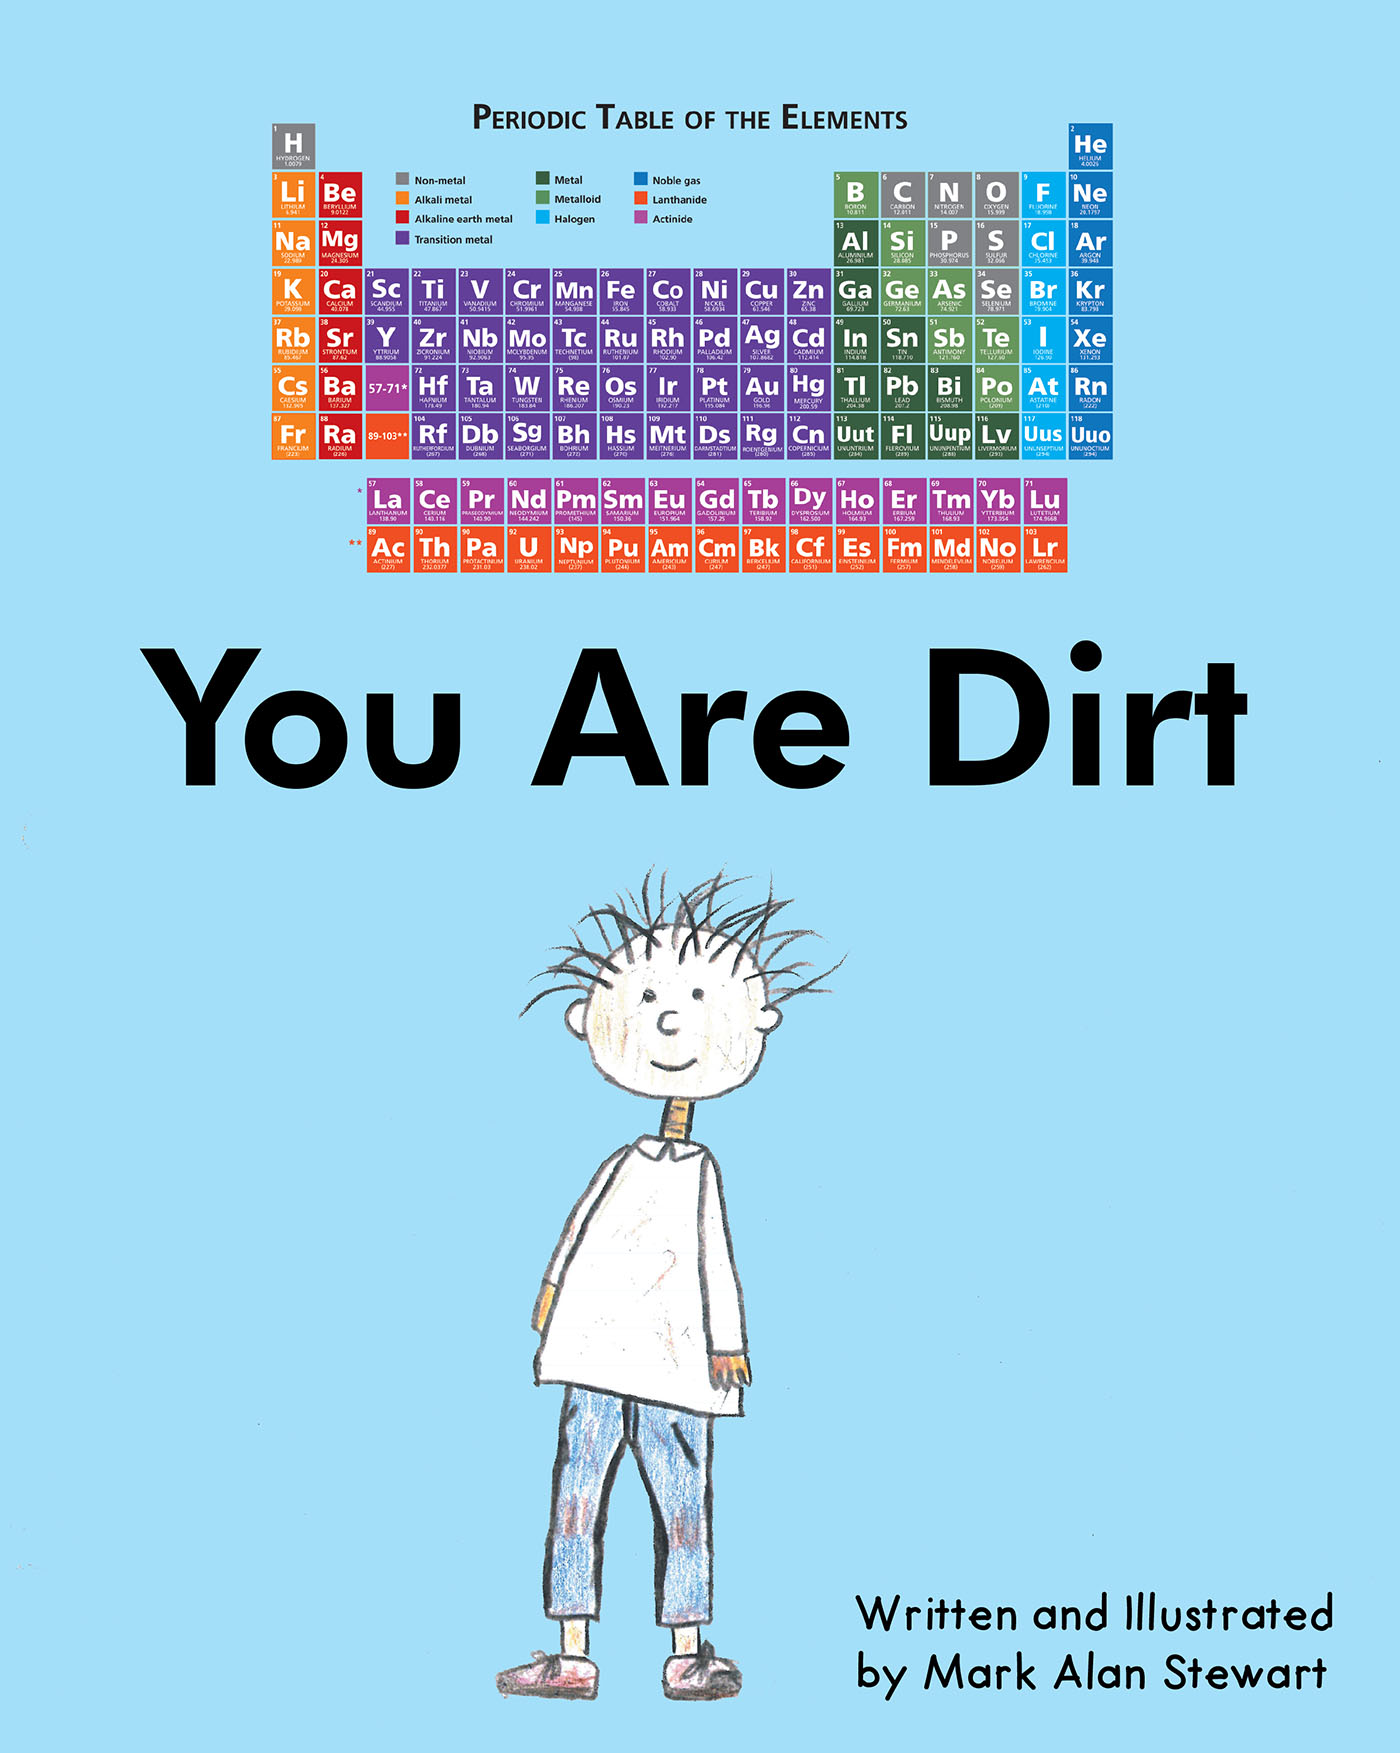 Mark Alan Stewart’s Newly Released "You Are Dirt" is a Fun and Informative Science Adventure for Young Readers